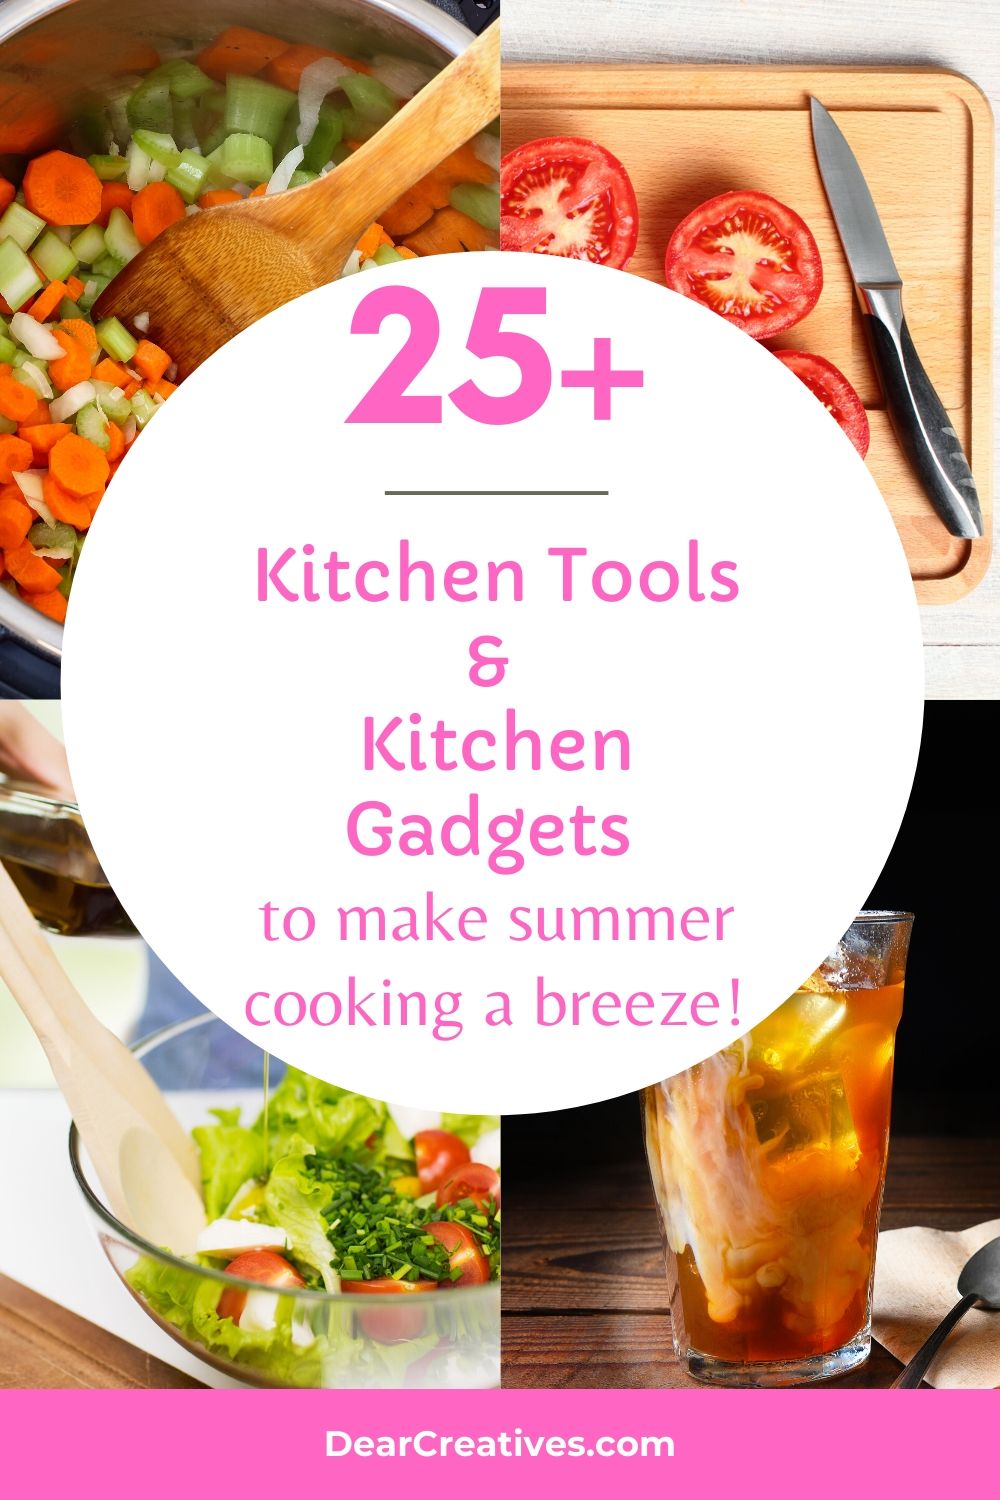 Kitchen Tools For Summer – Make Cooking A Breeze!